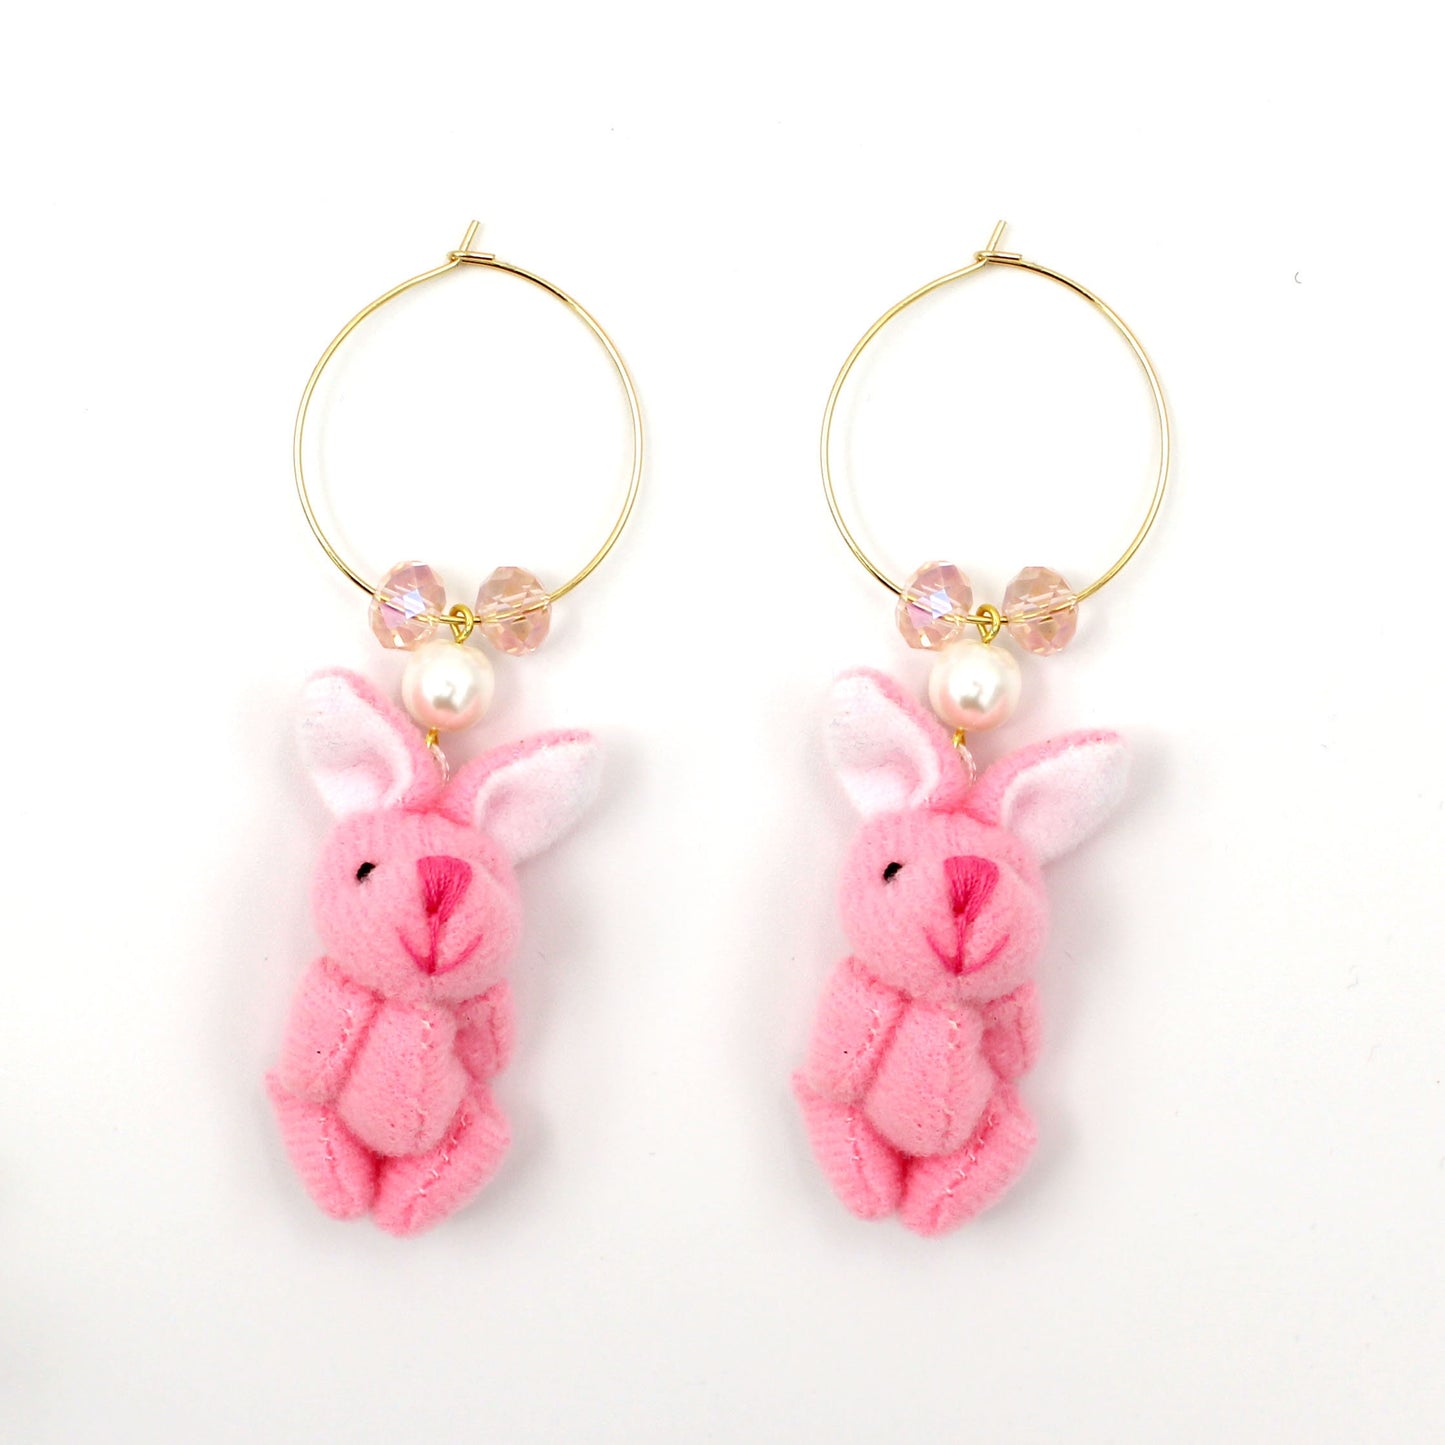 Plush Easter Bunny Earrings - Gauge & Stretched Ear Friendly - Hypoallergenic